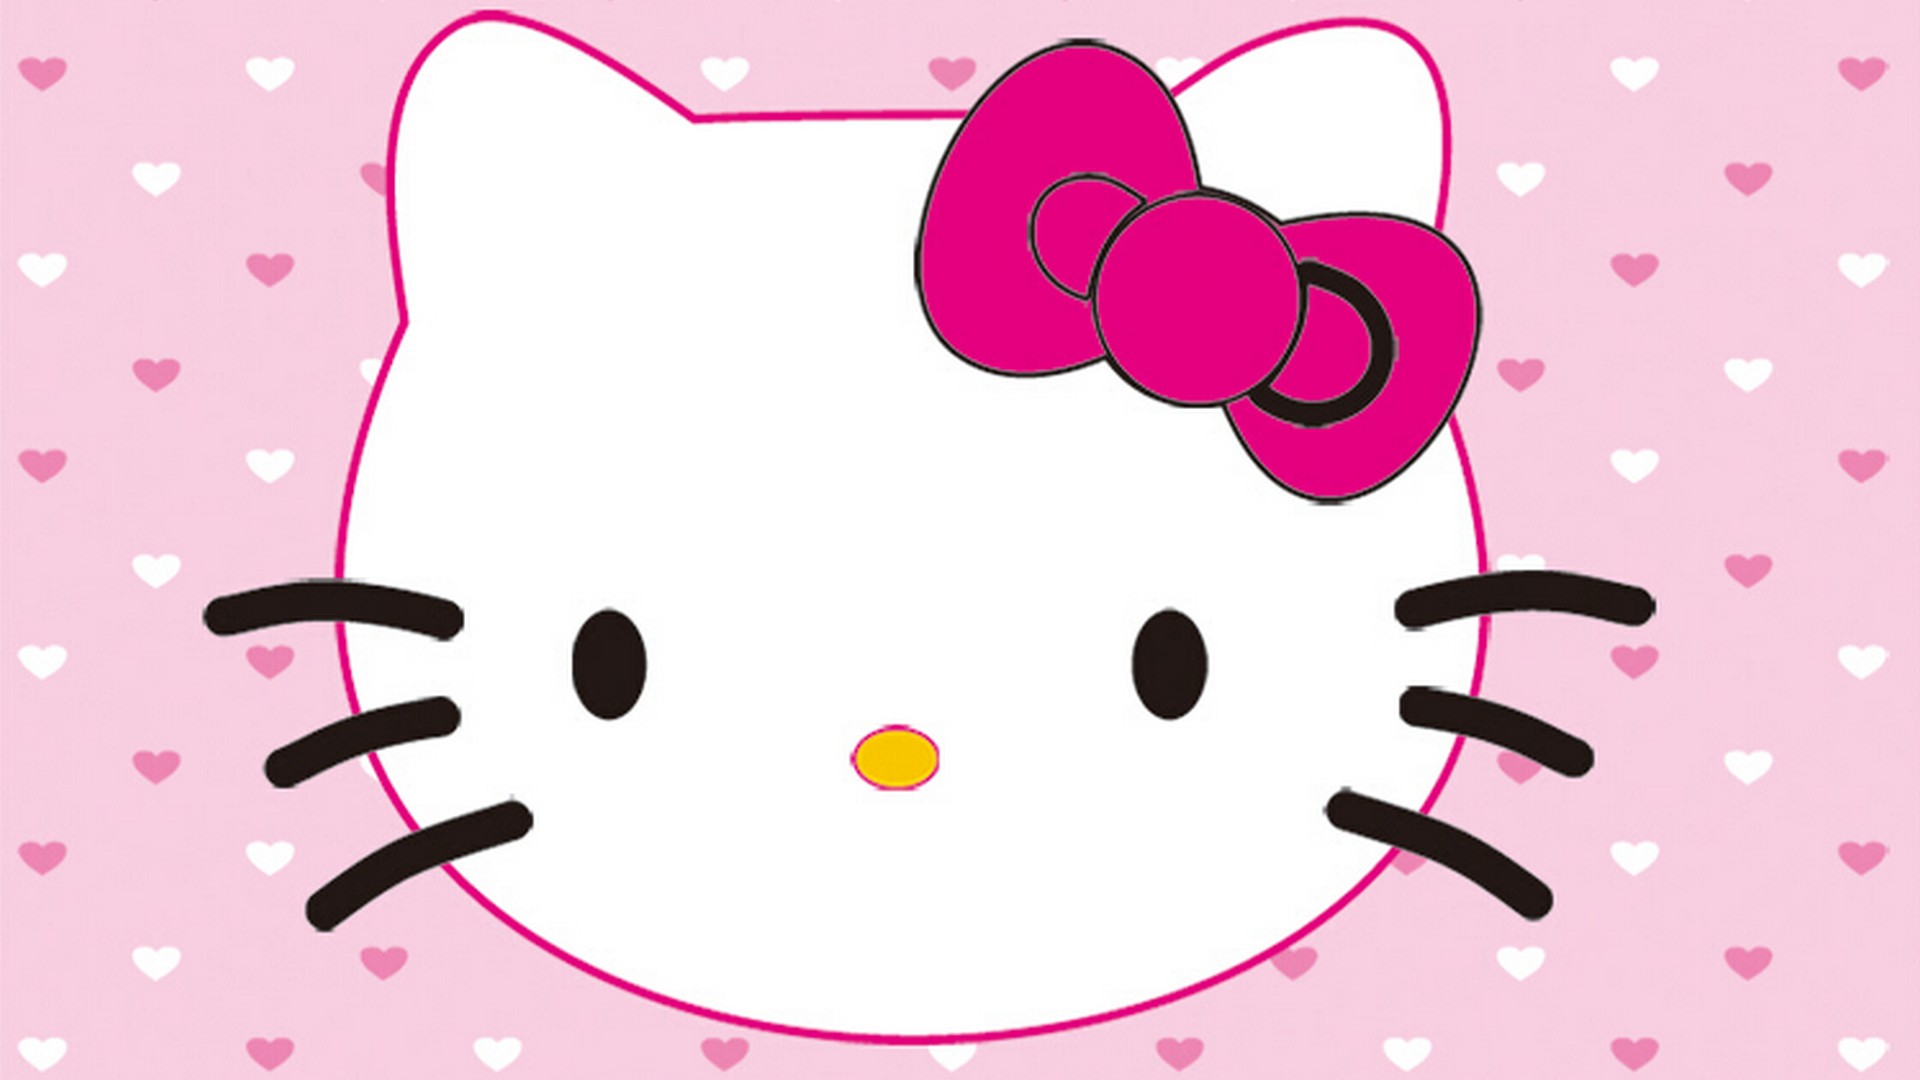 Hello Kitty Desktop Backgrounds with image resolution 1920x1080 pixel. You can make this wallpaper for your Desktop Computer Backgrounds, Mac Wallpapers, Android Lock screen or iPhone Screensavers